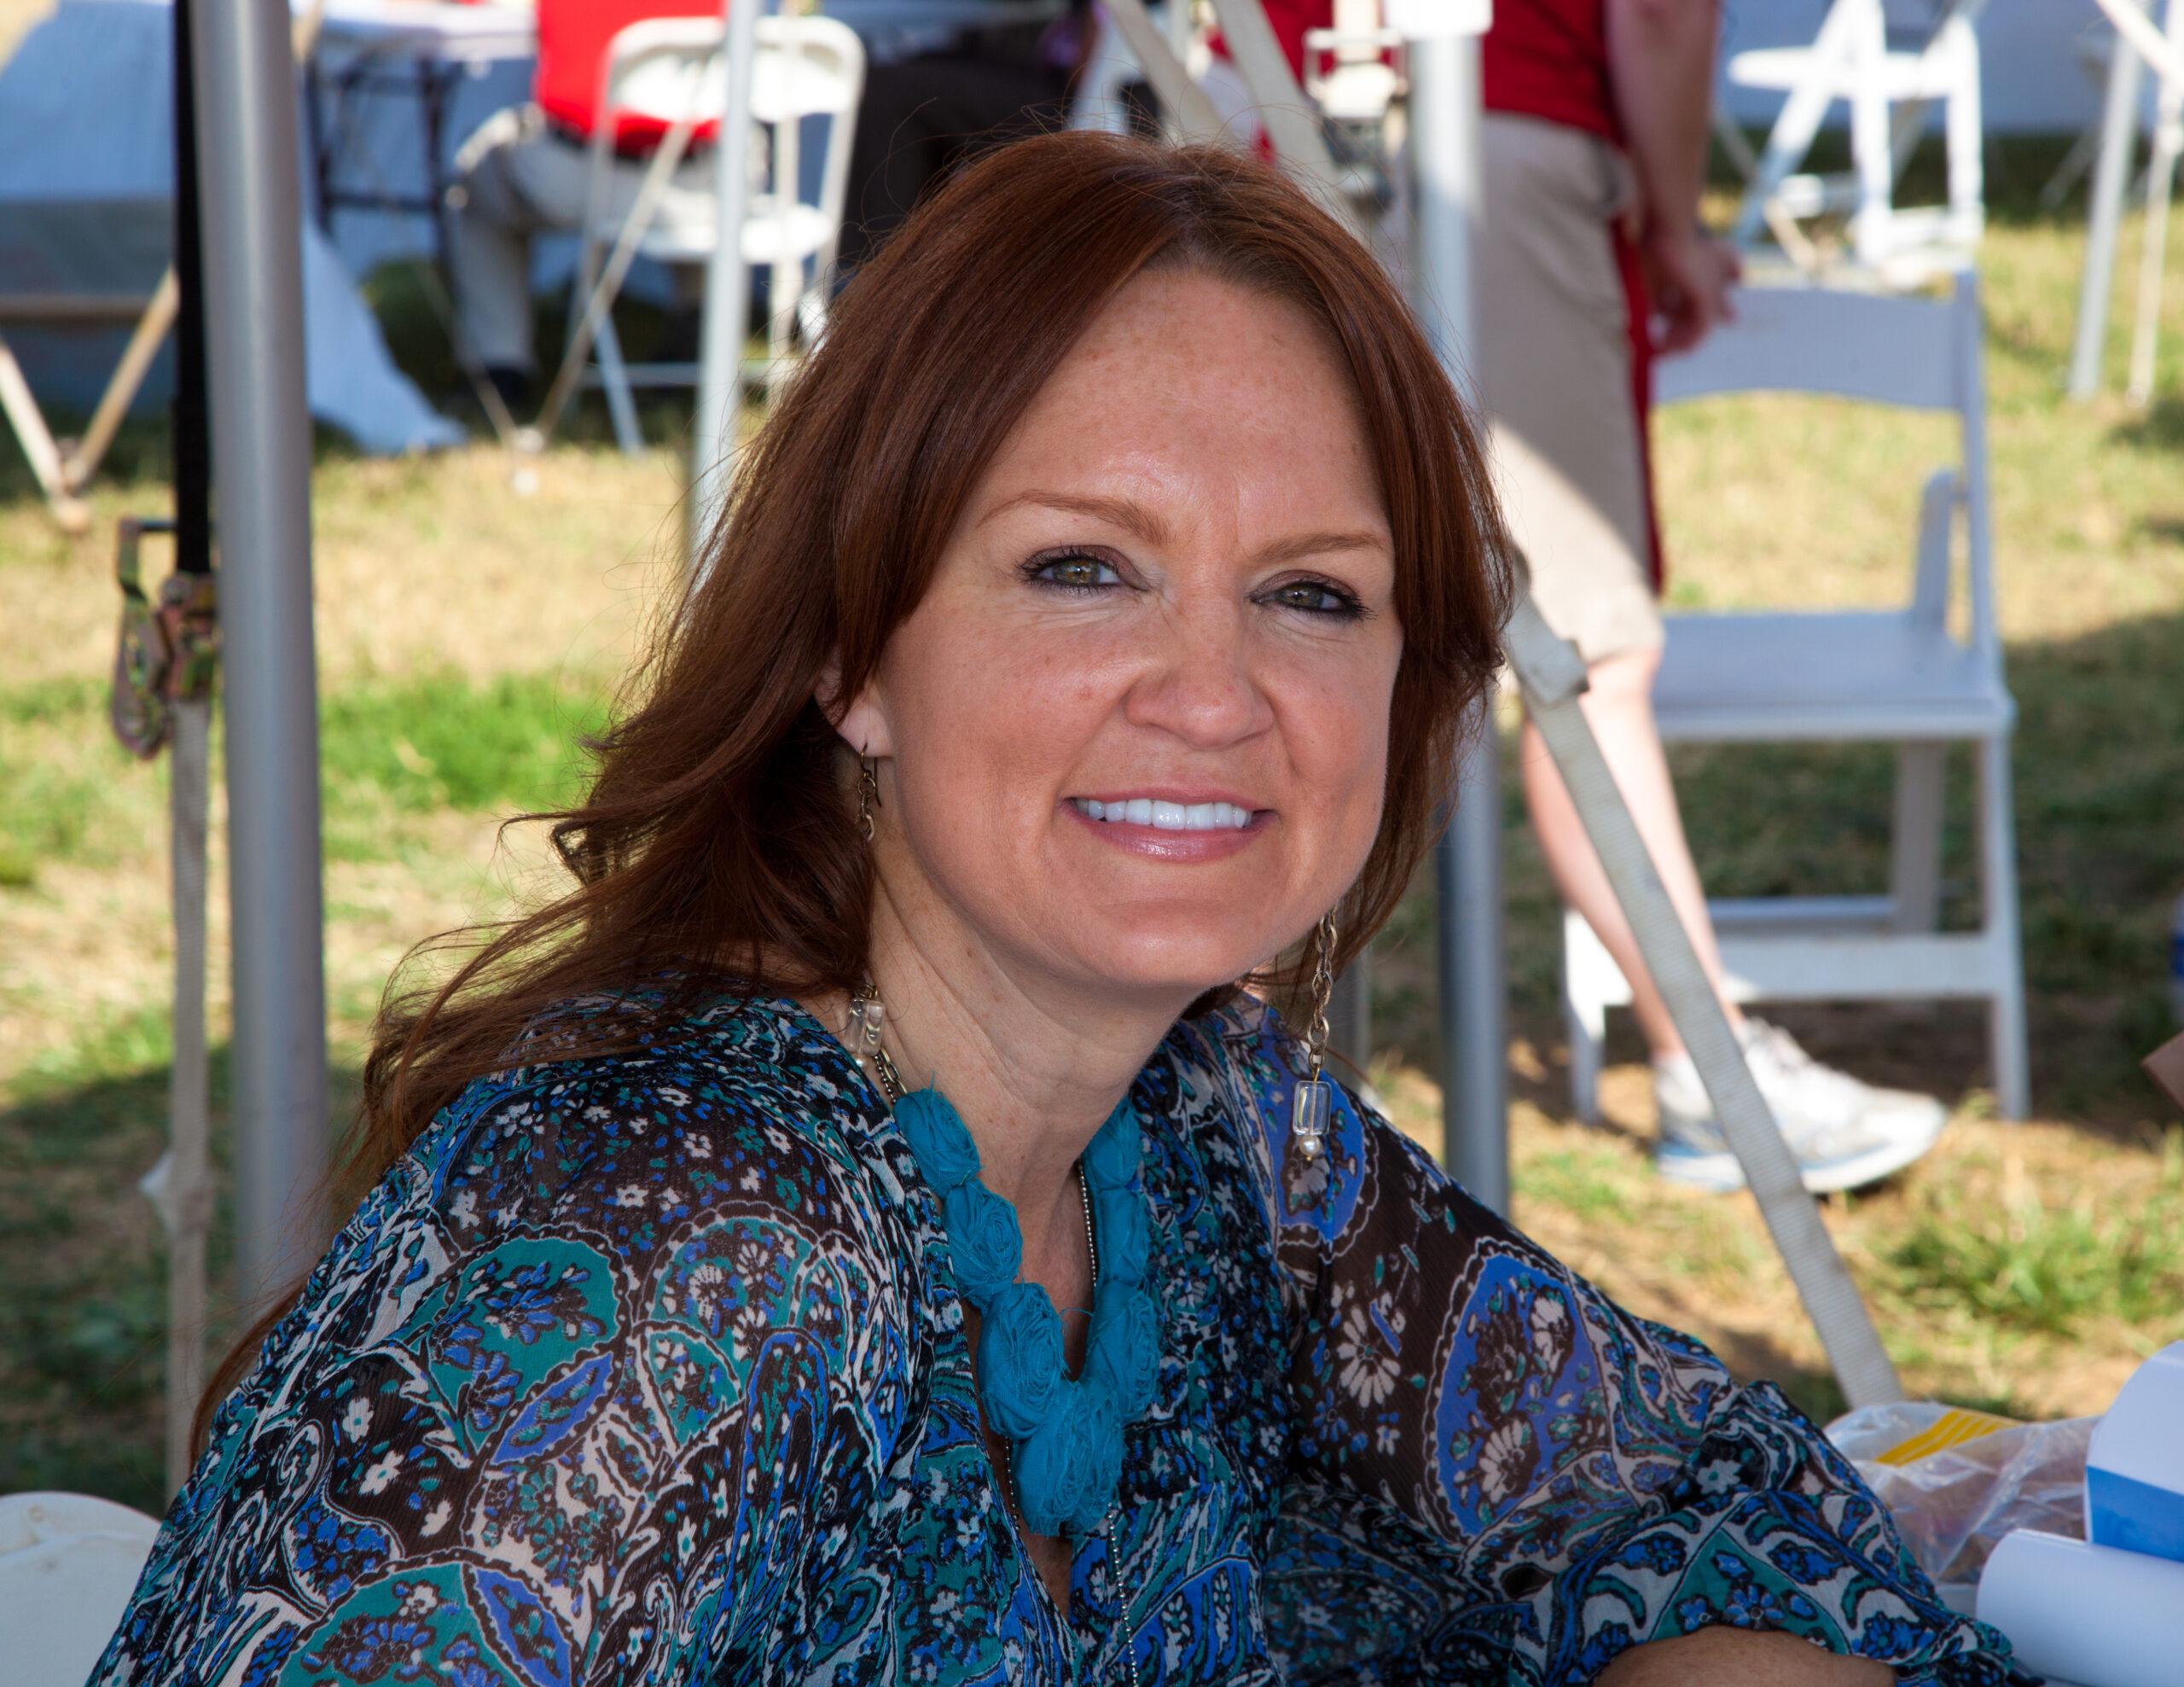 Ree Drummond joins 70 best-selling authors, poets and illustrators at the National Book Festival (September 25, 2010)